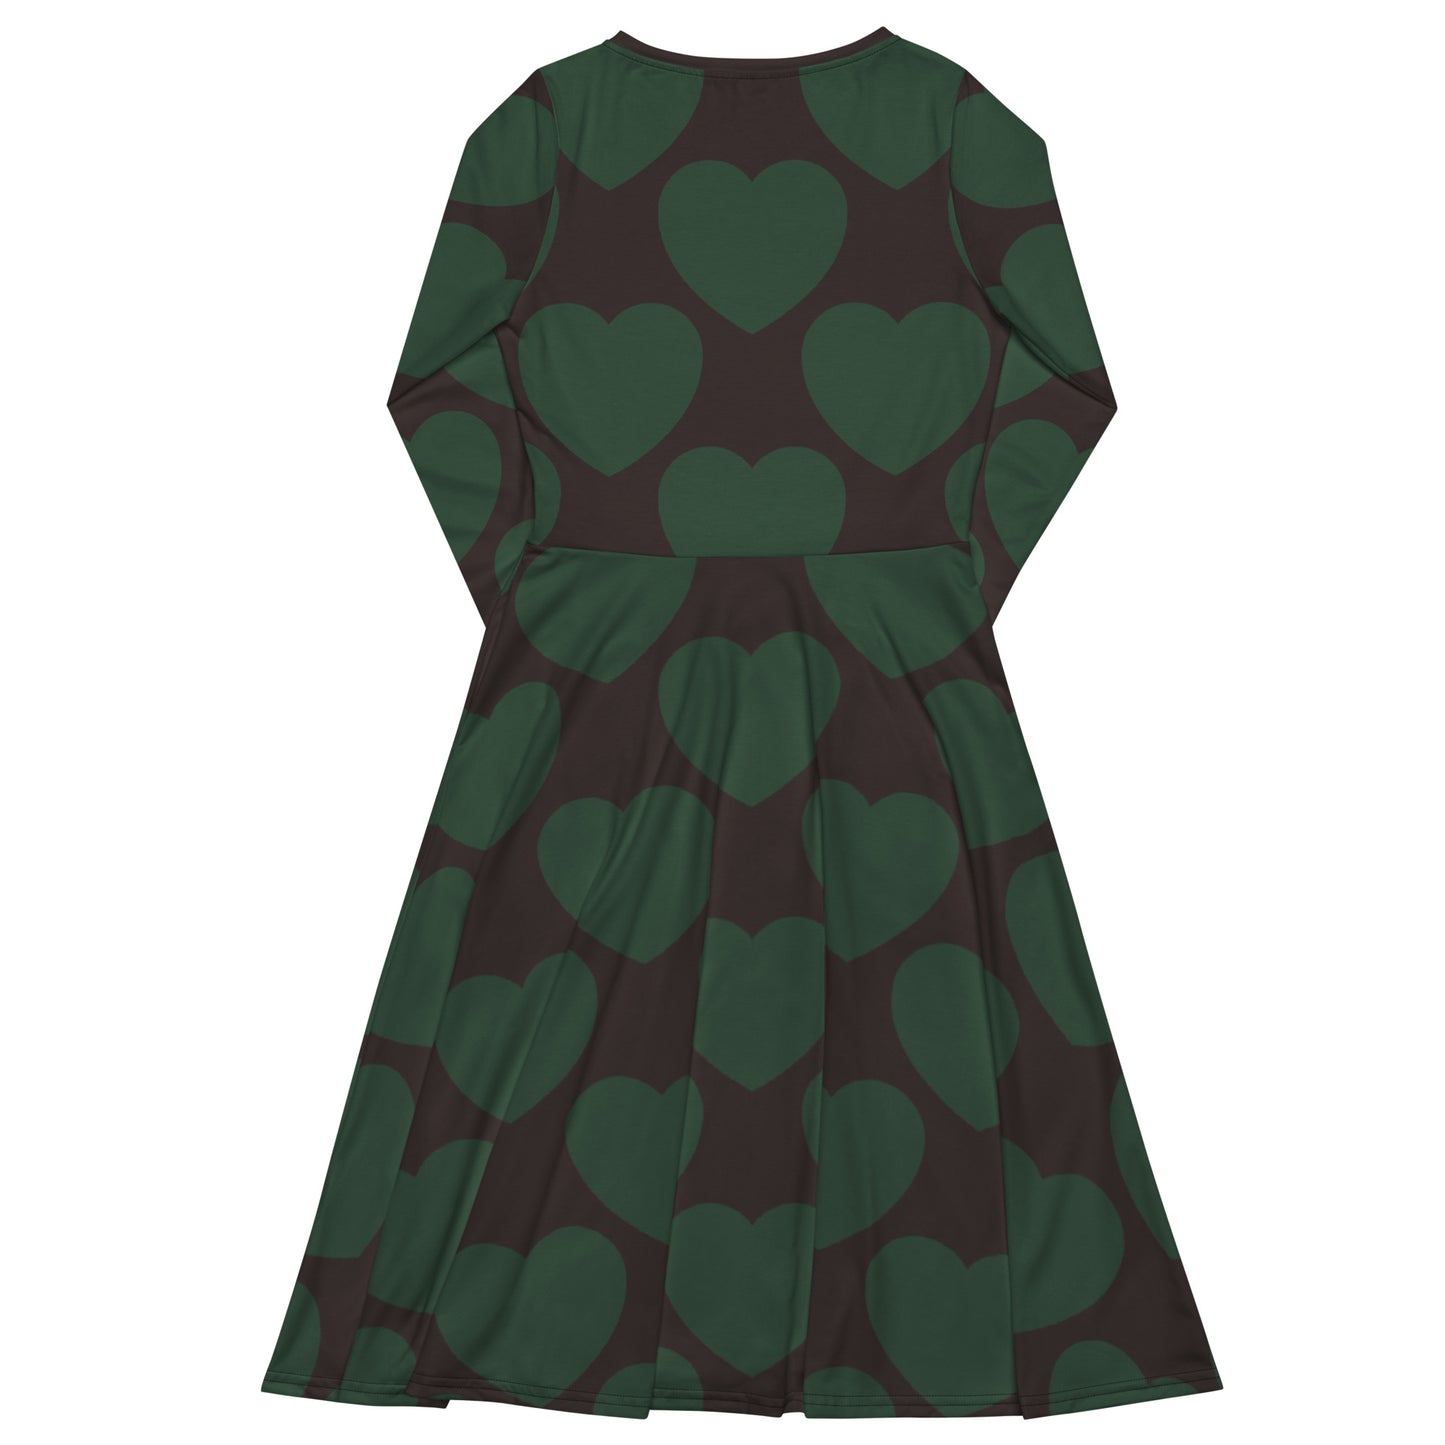 ELLIE LOVE forest - Midi dress with long sleeves and handy pockets